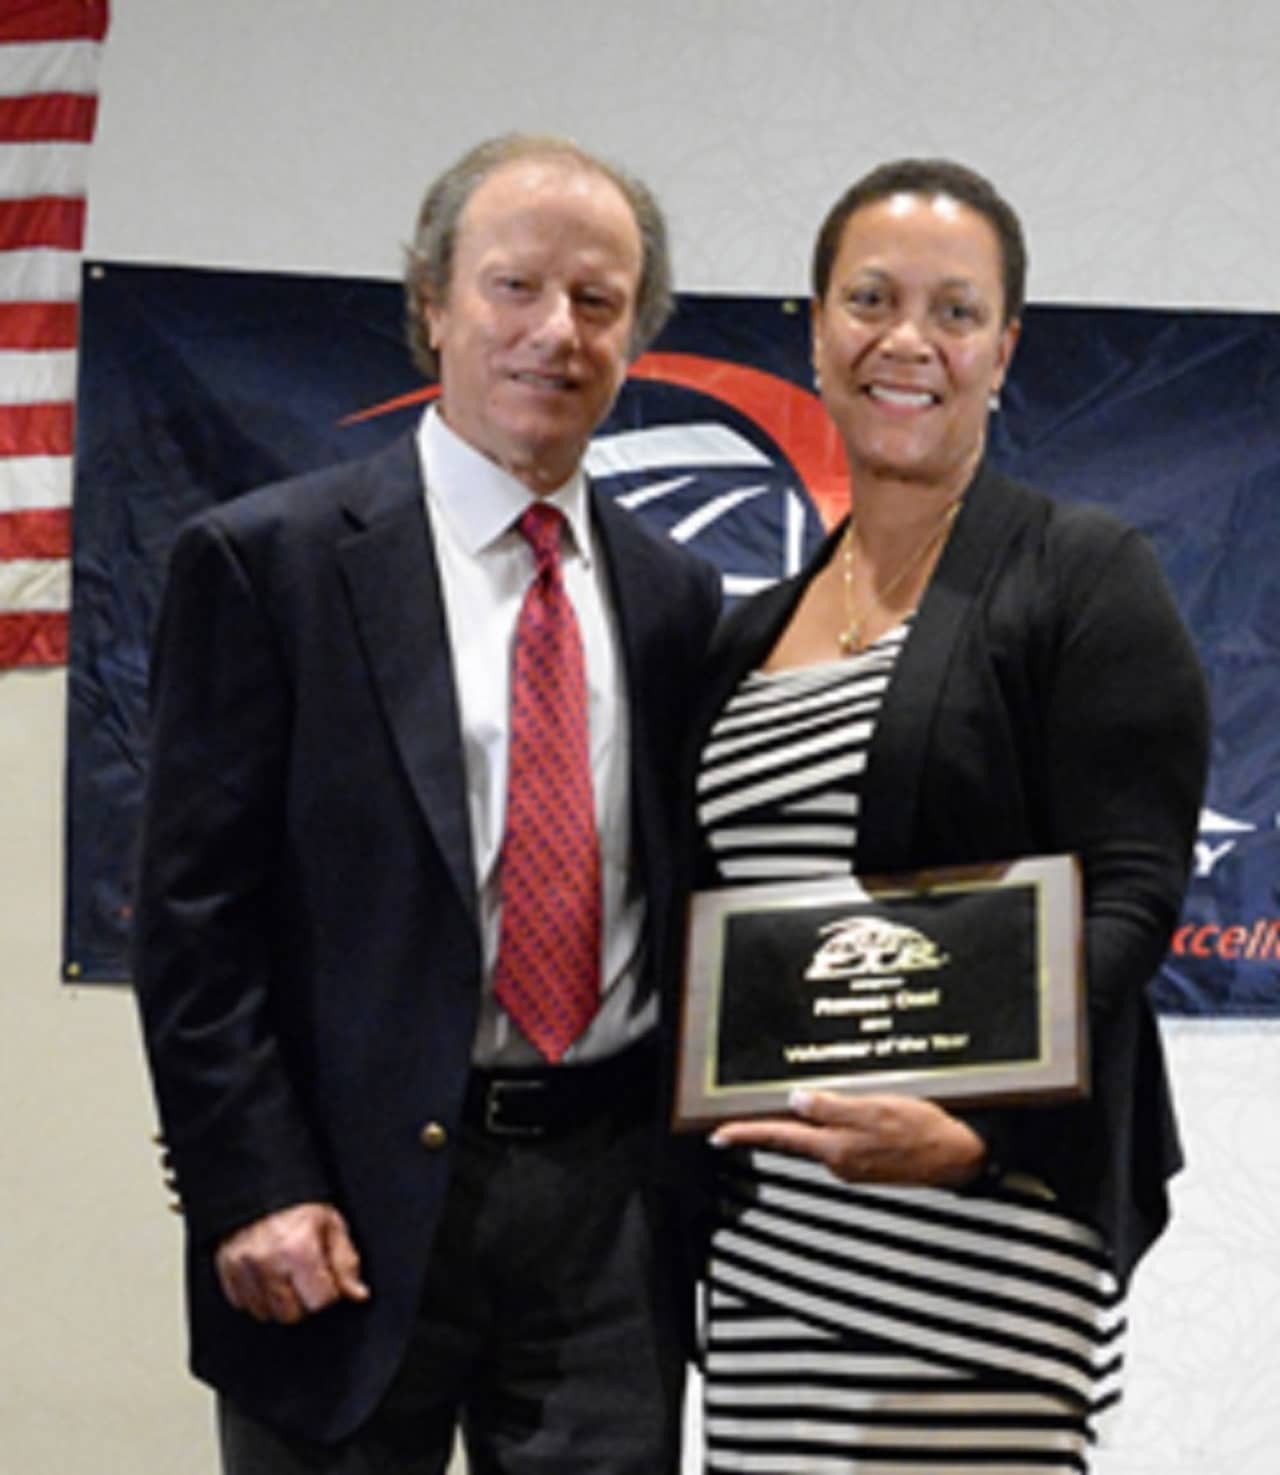 Fran Osei is shown in 2015 with Roy Barth, president, Professional Tennis Registry when she was named the registry's Volunteer of the Year.